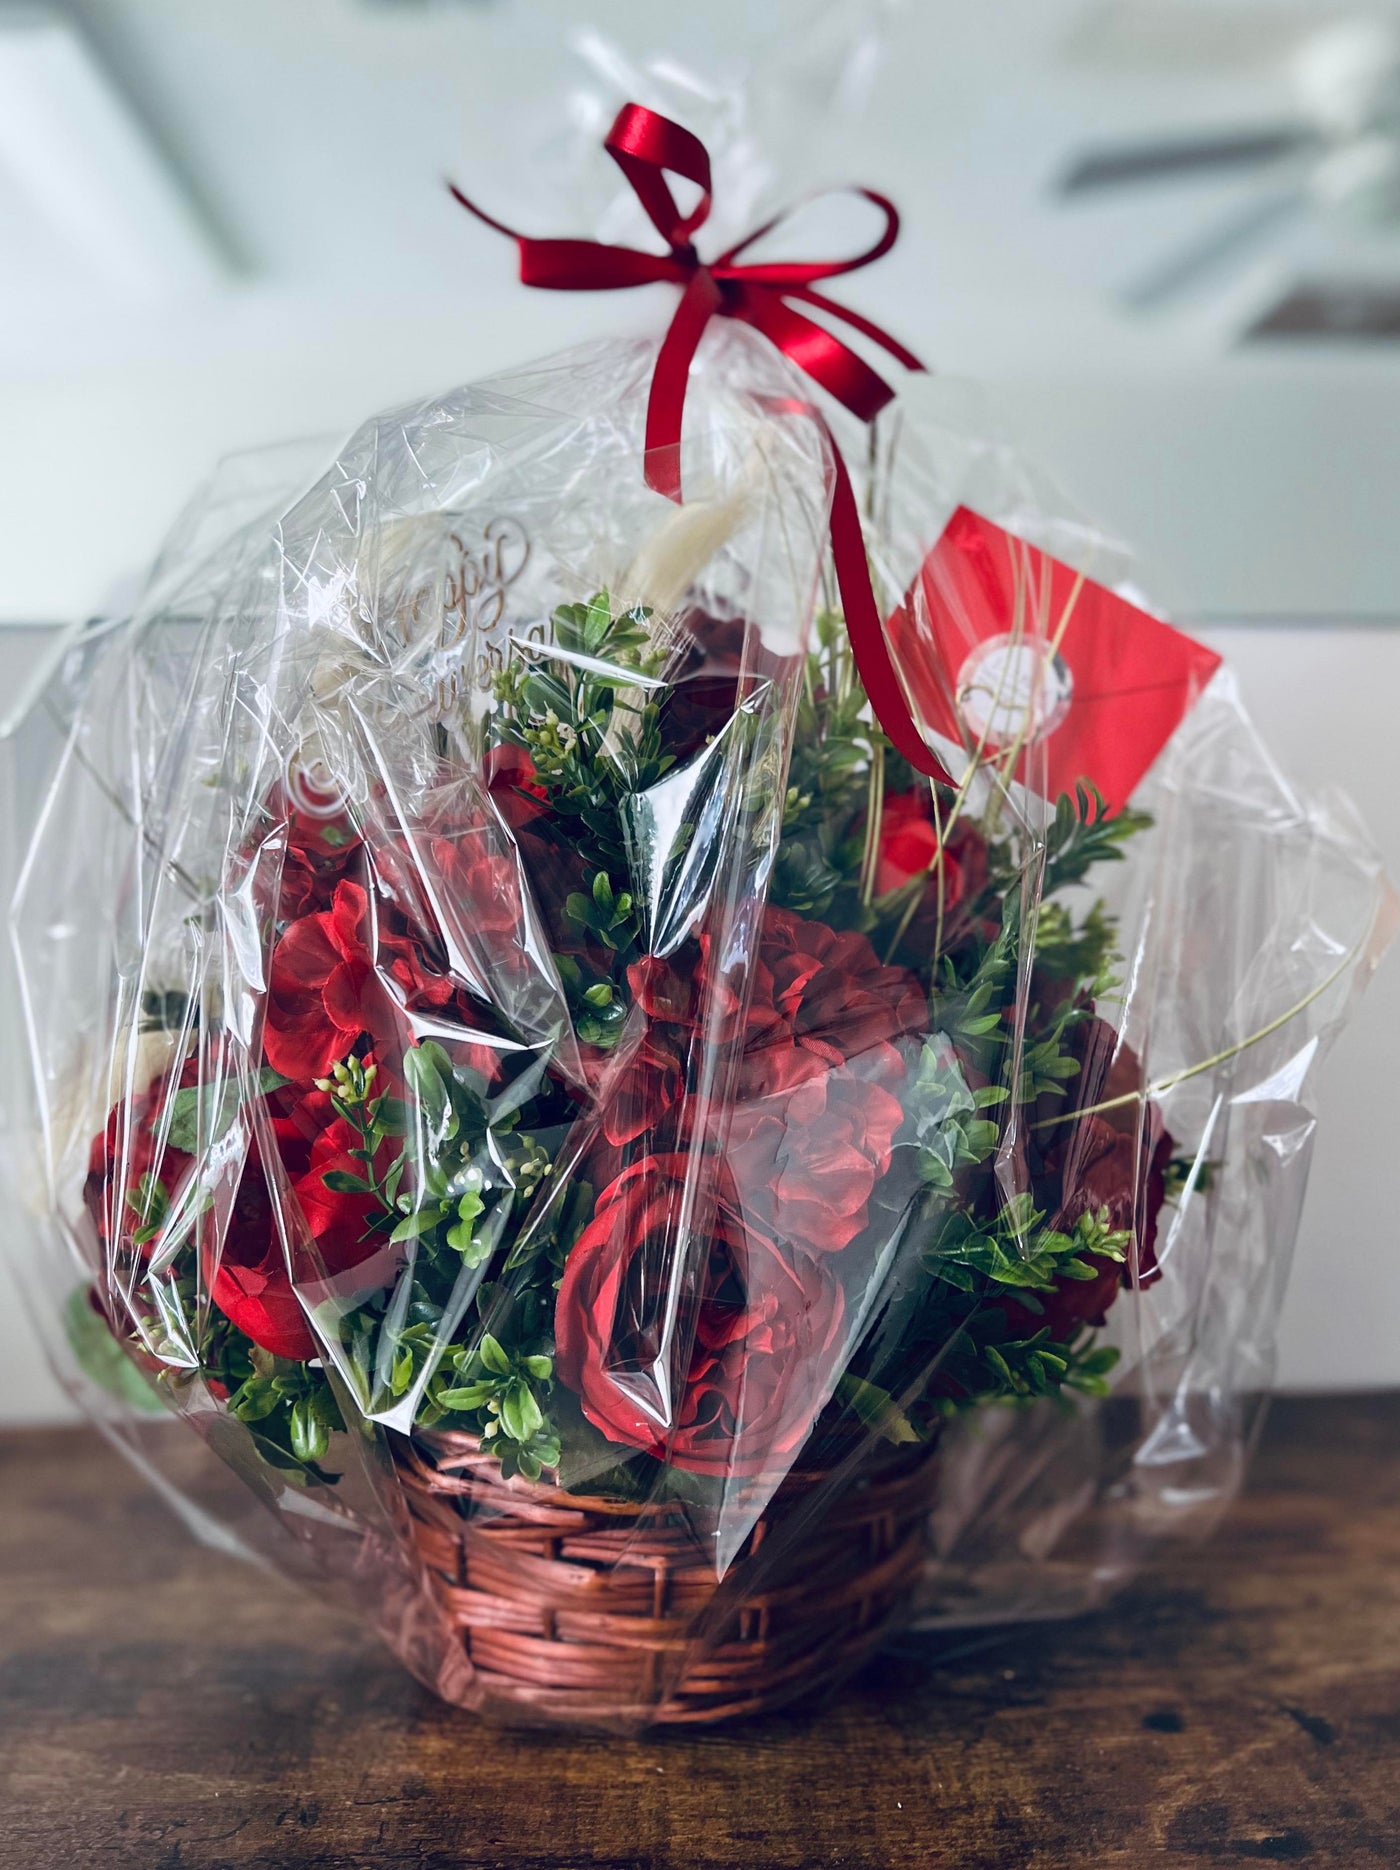 The Red Wine Flower Basket